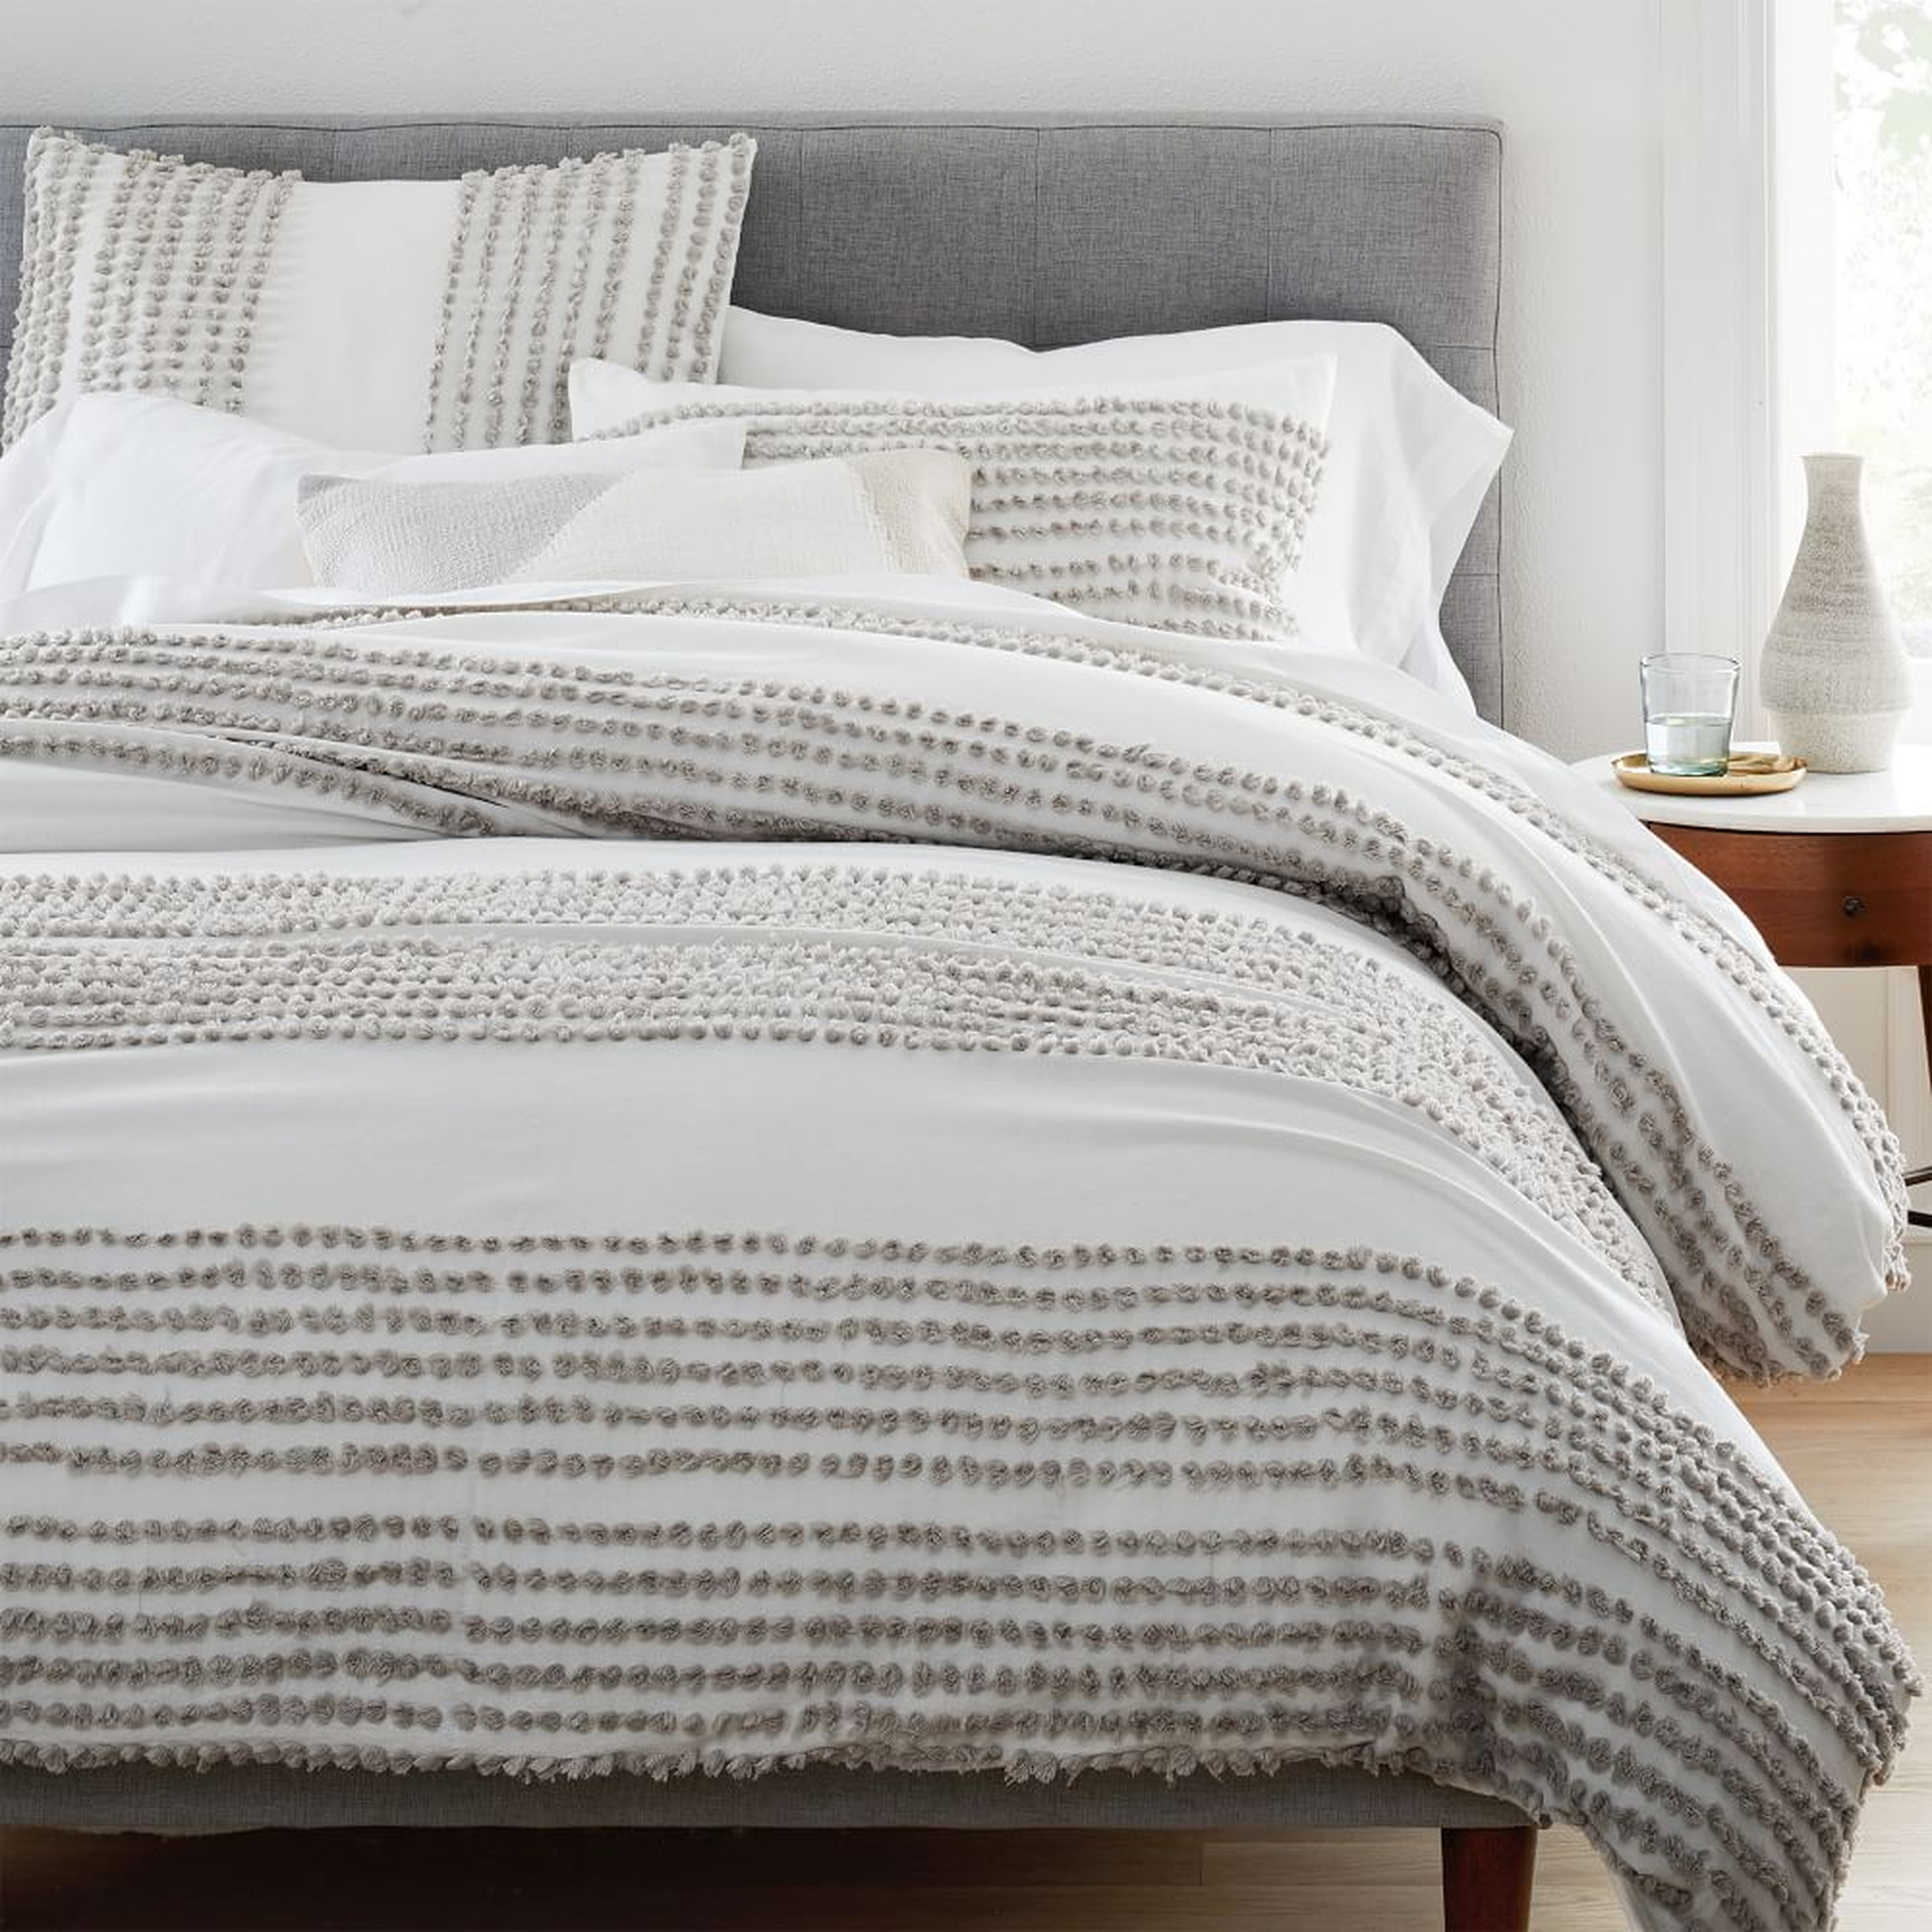 Candlewick King/Cal. King Duvet, Pearl Gray & White - West Elm